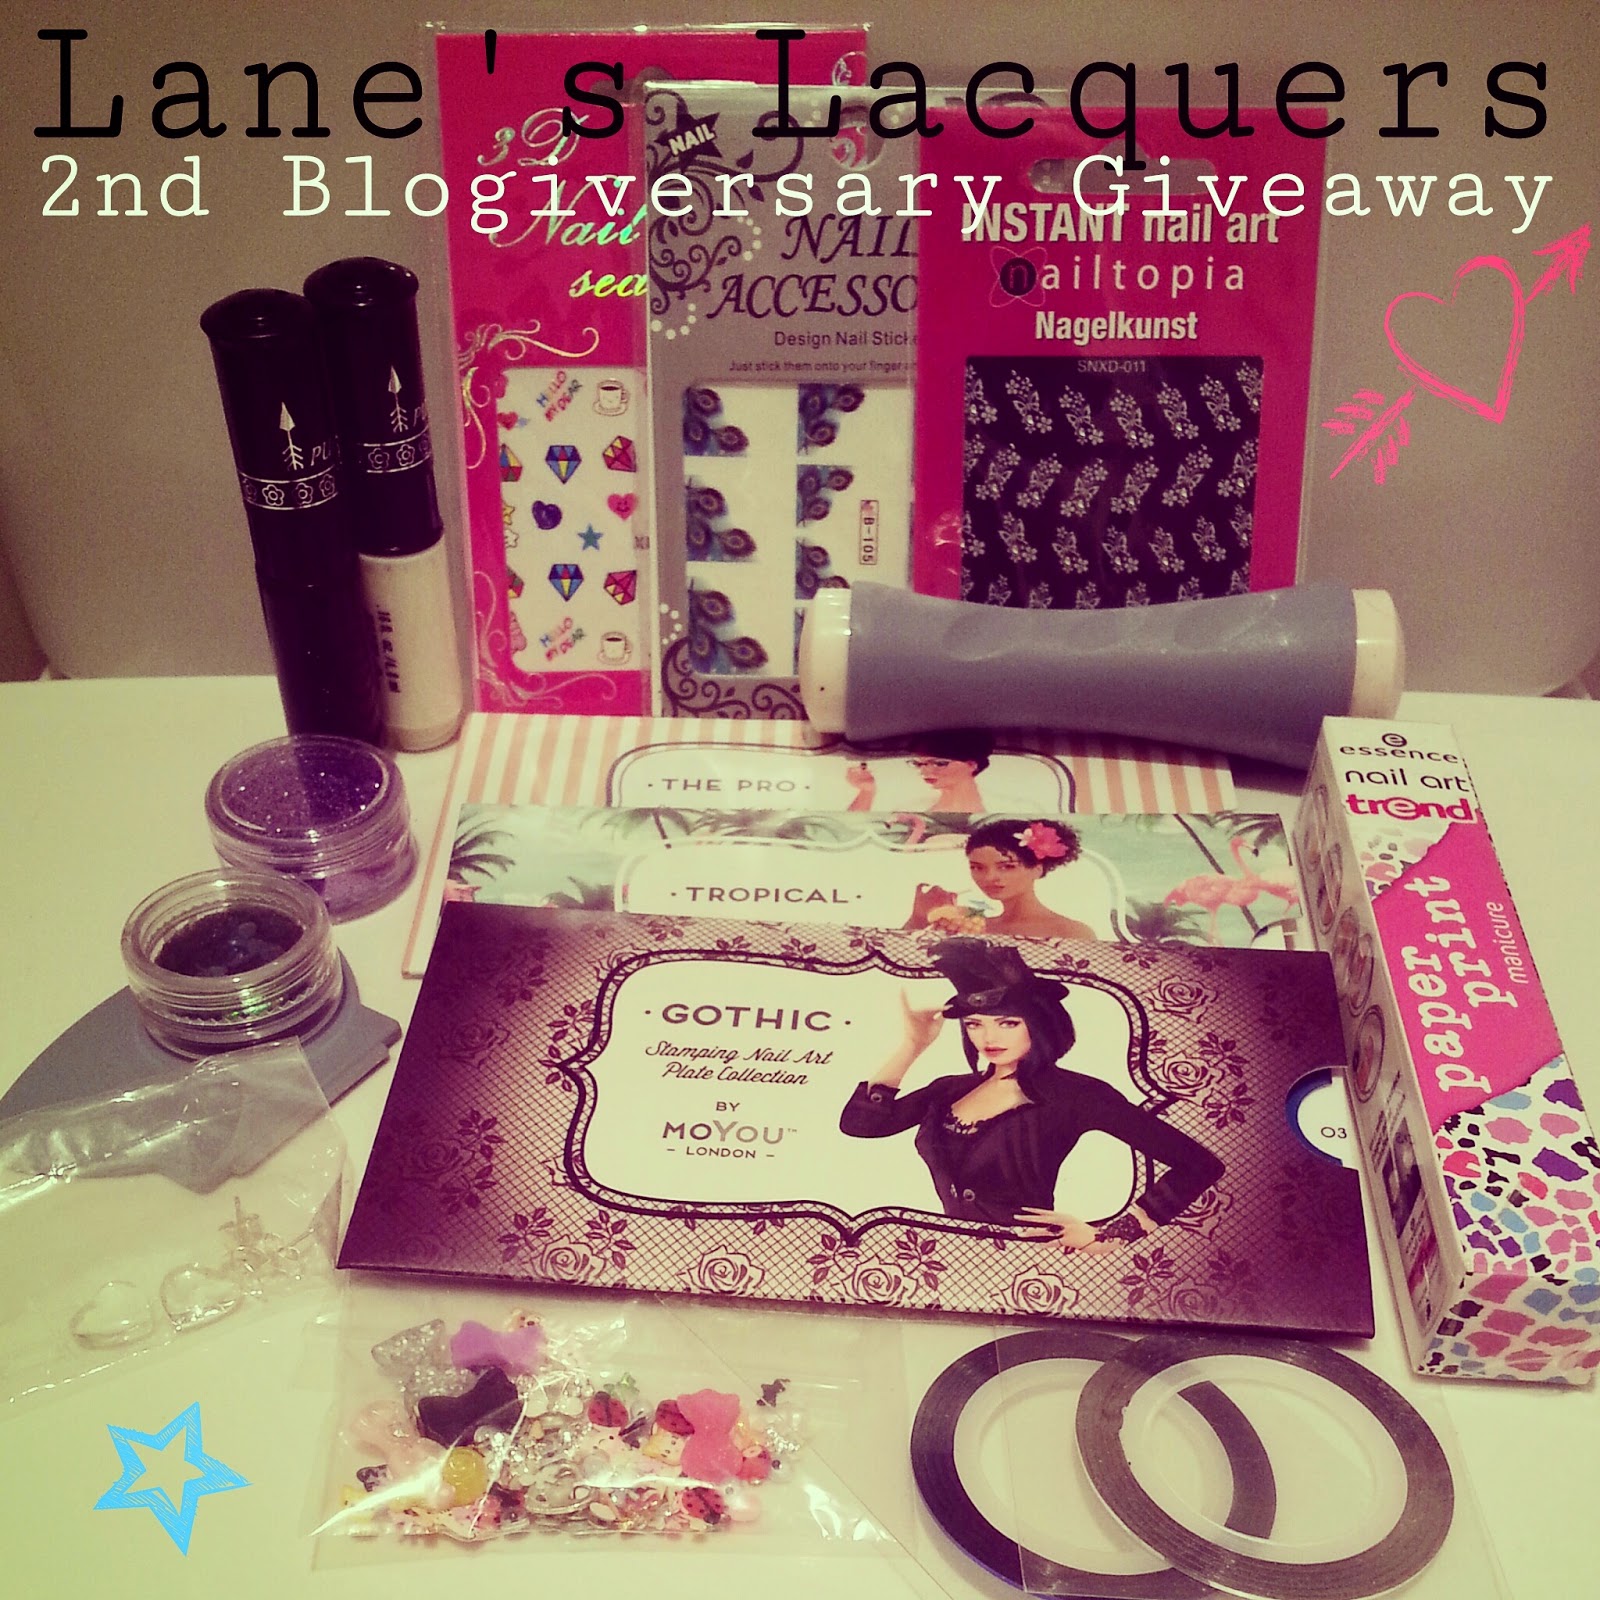 lanes-lacquers-second-blogiversary-giveaway